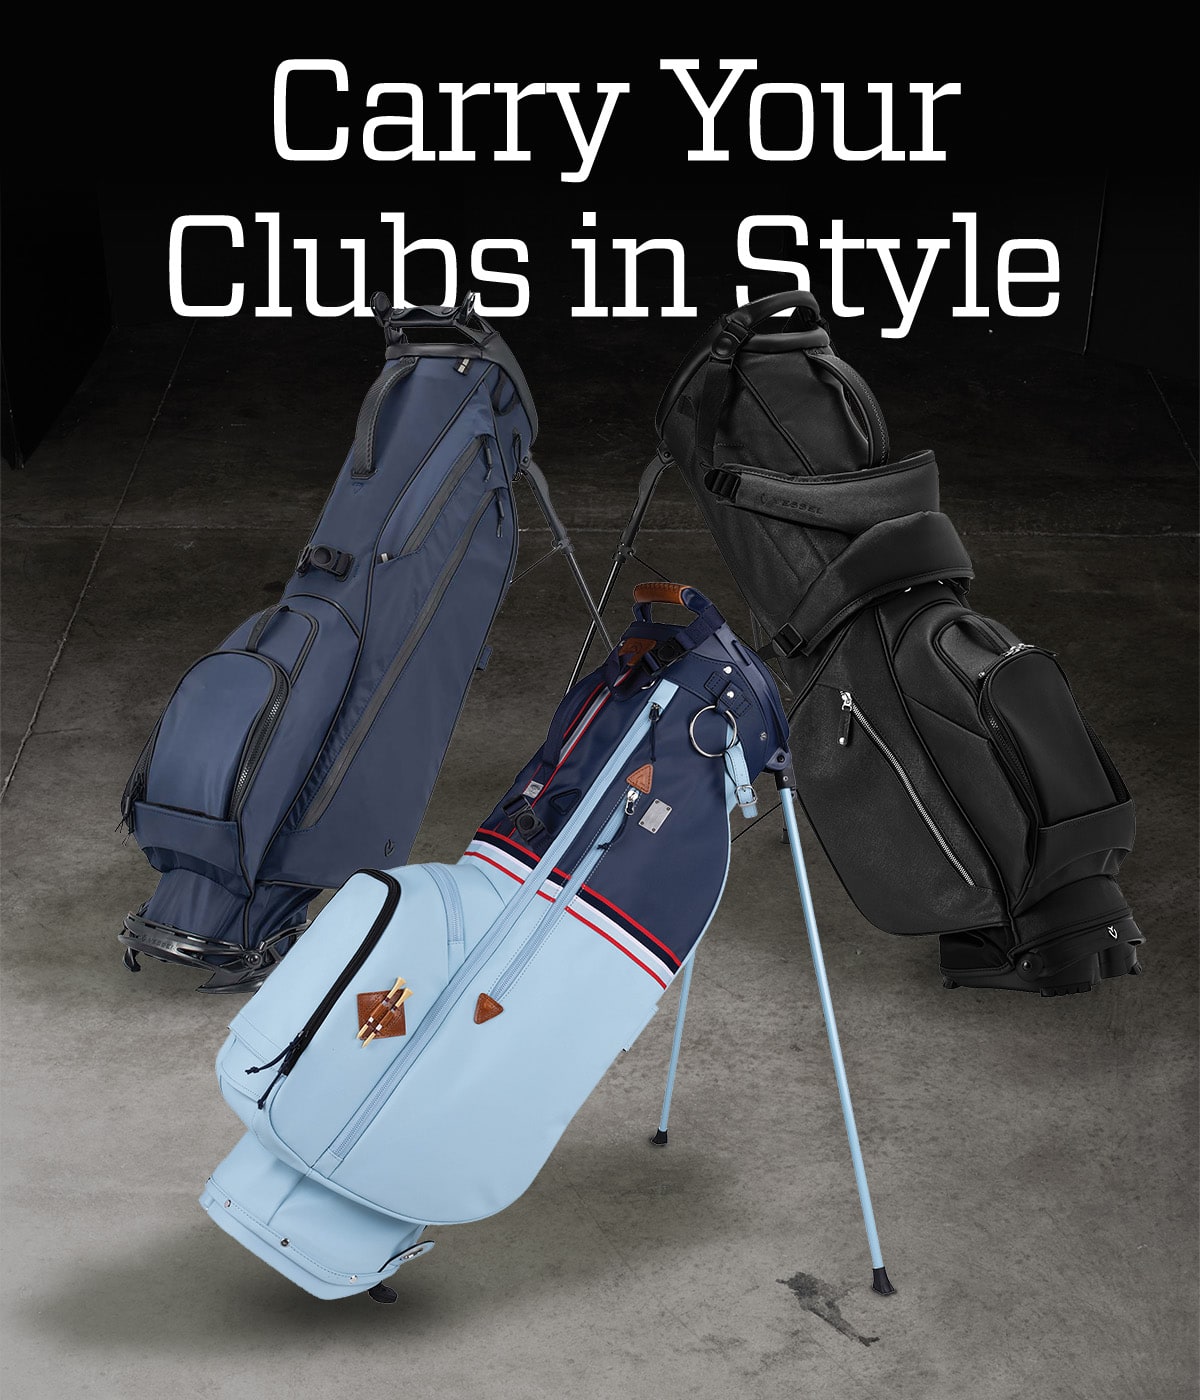  Carry your clubs in style.